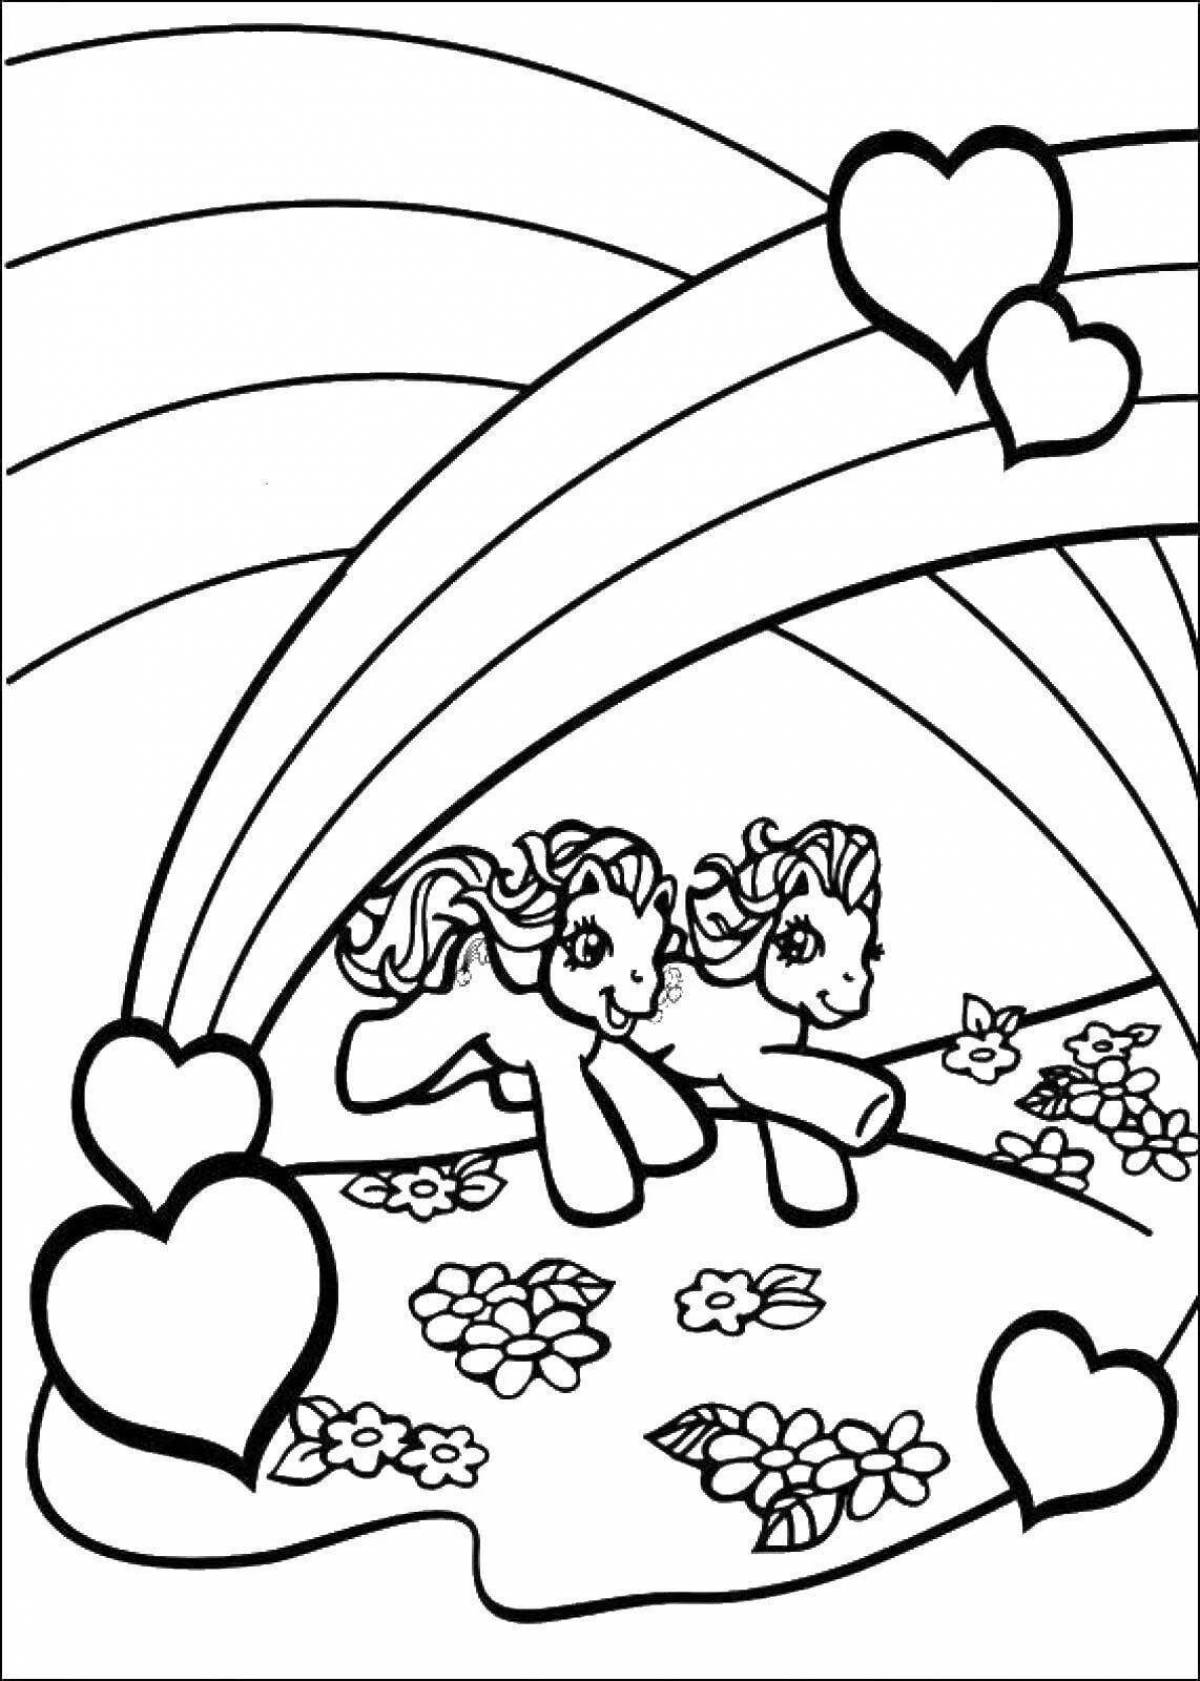 Exquisite rainbow heart coloring page